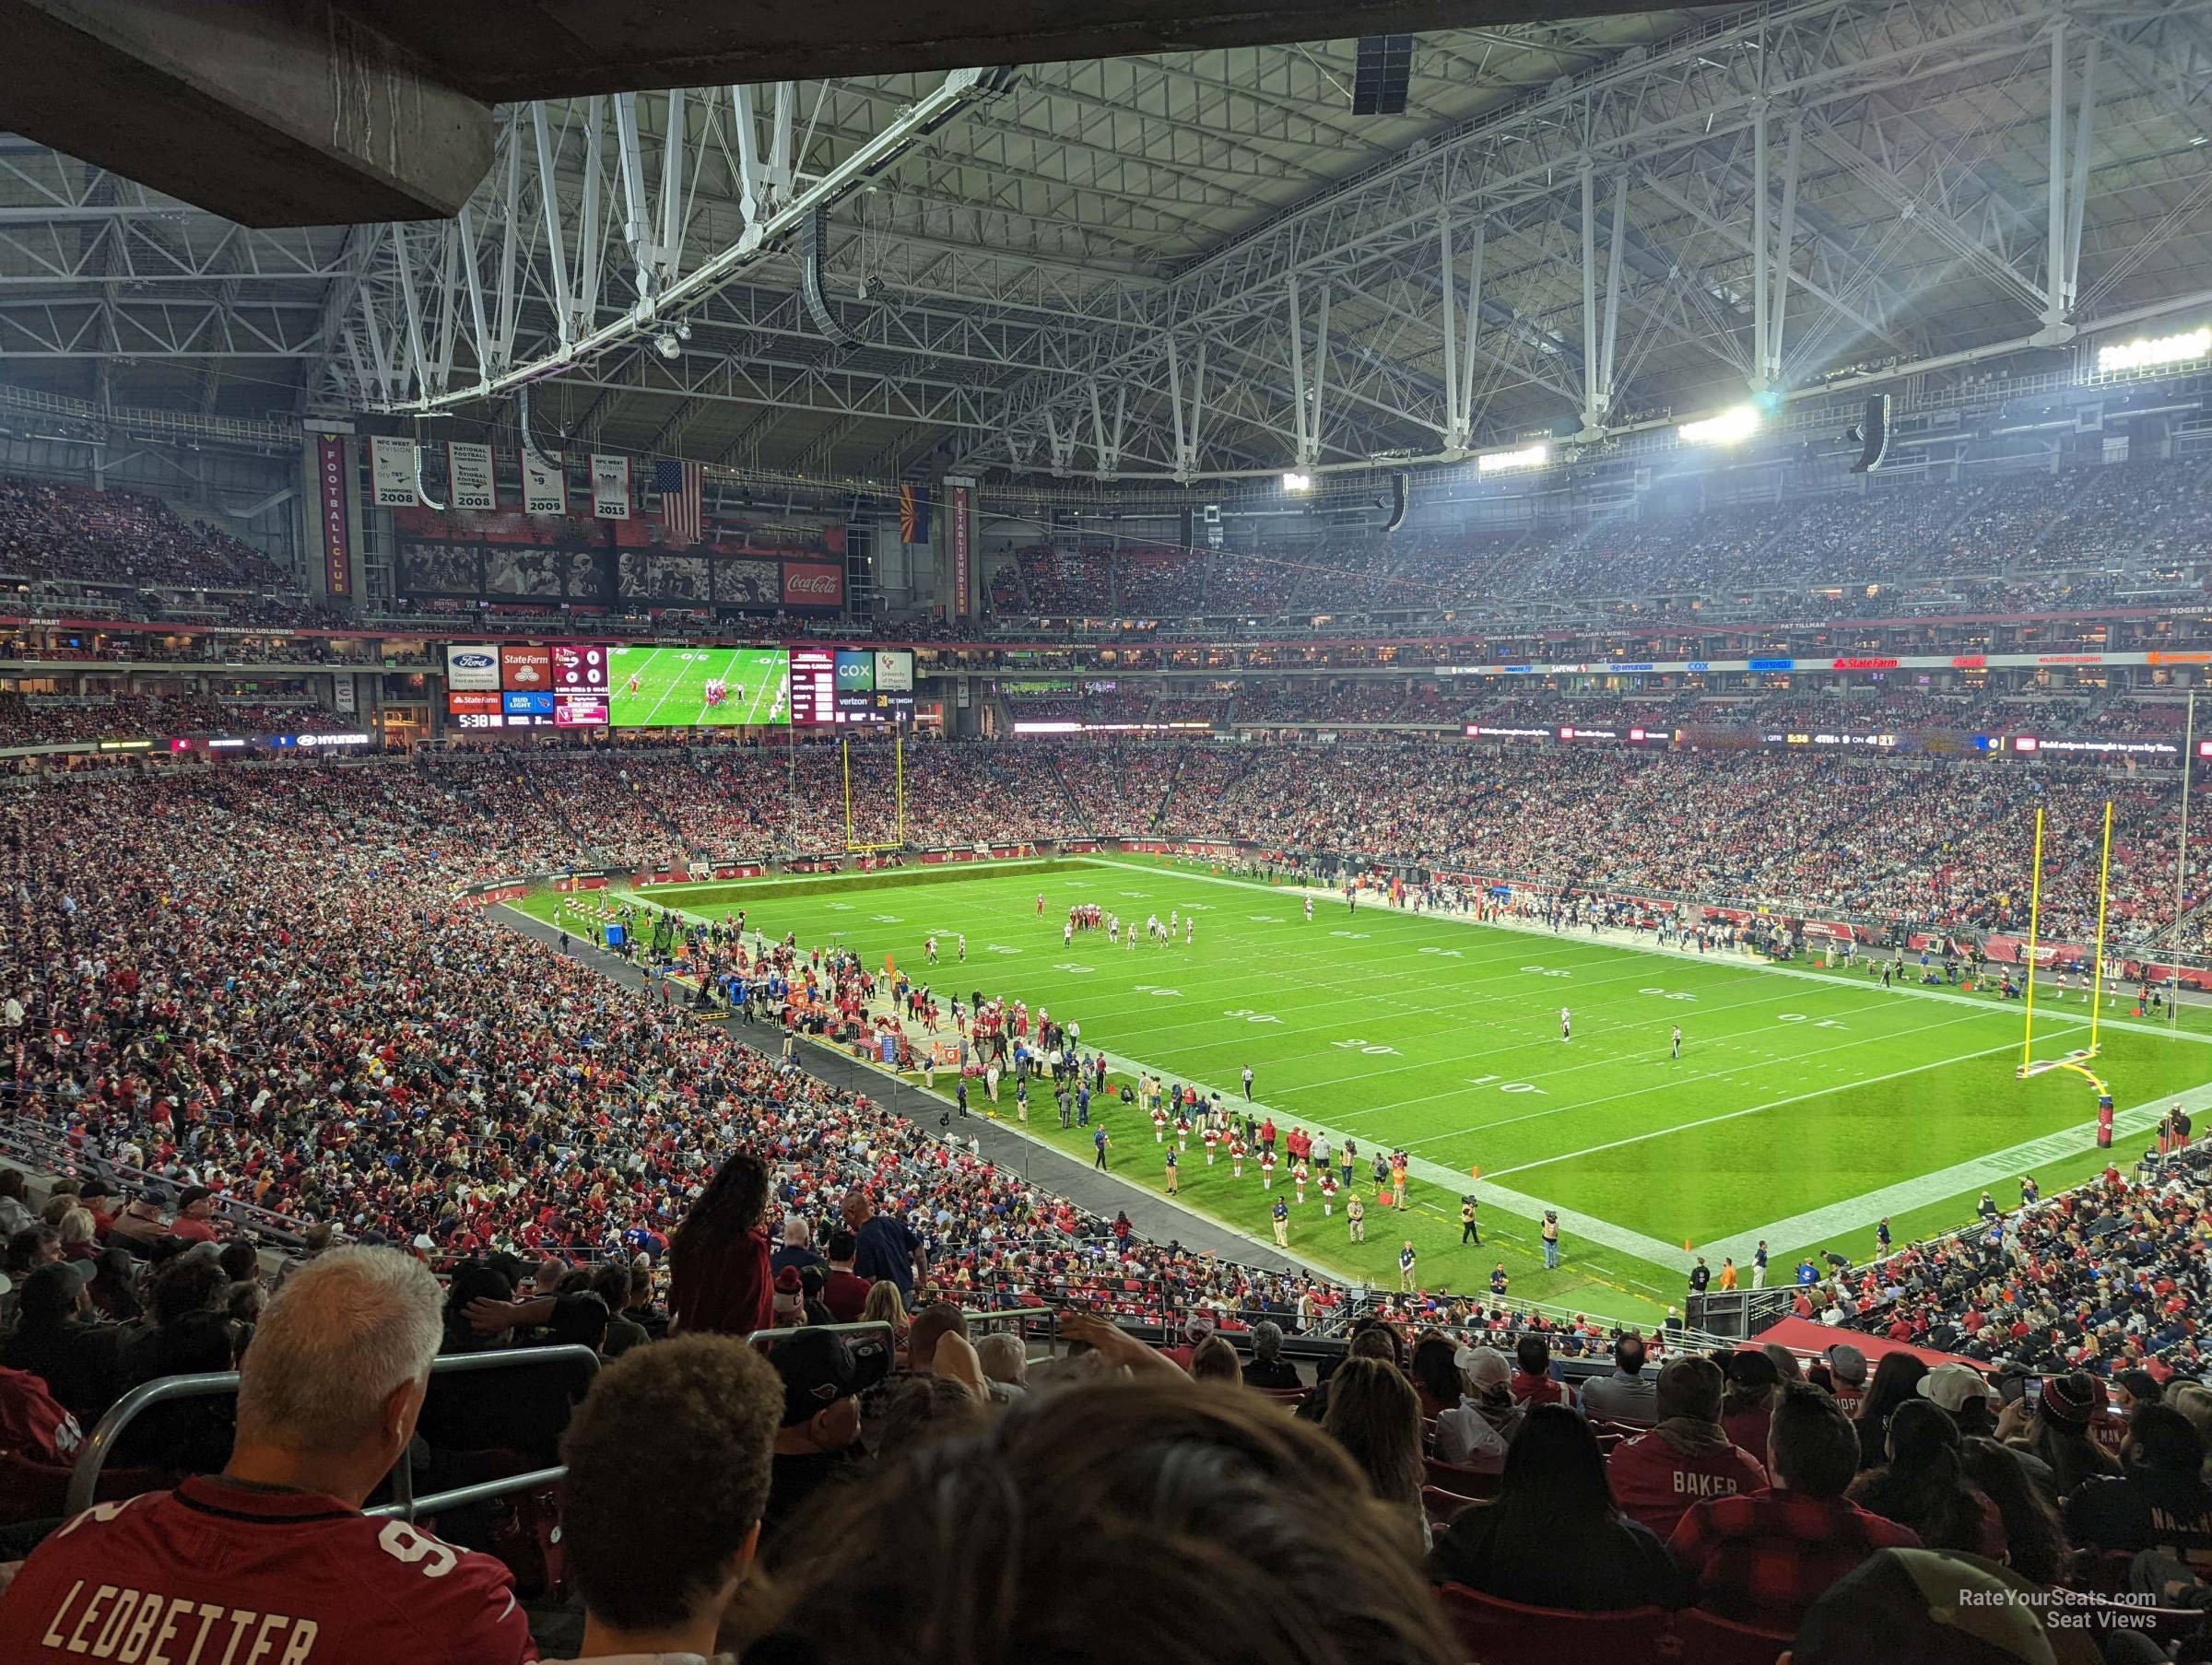 Section 204 at State Farm Stadium - RateYourSeats.com